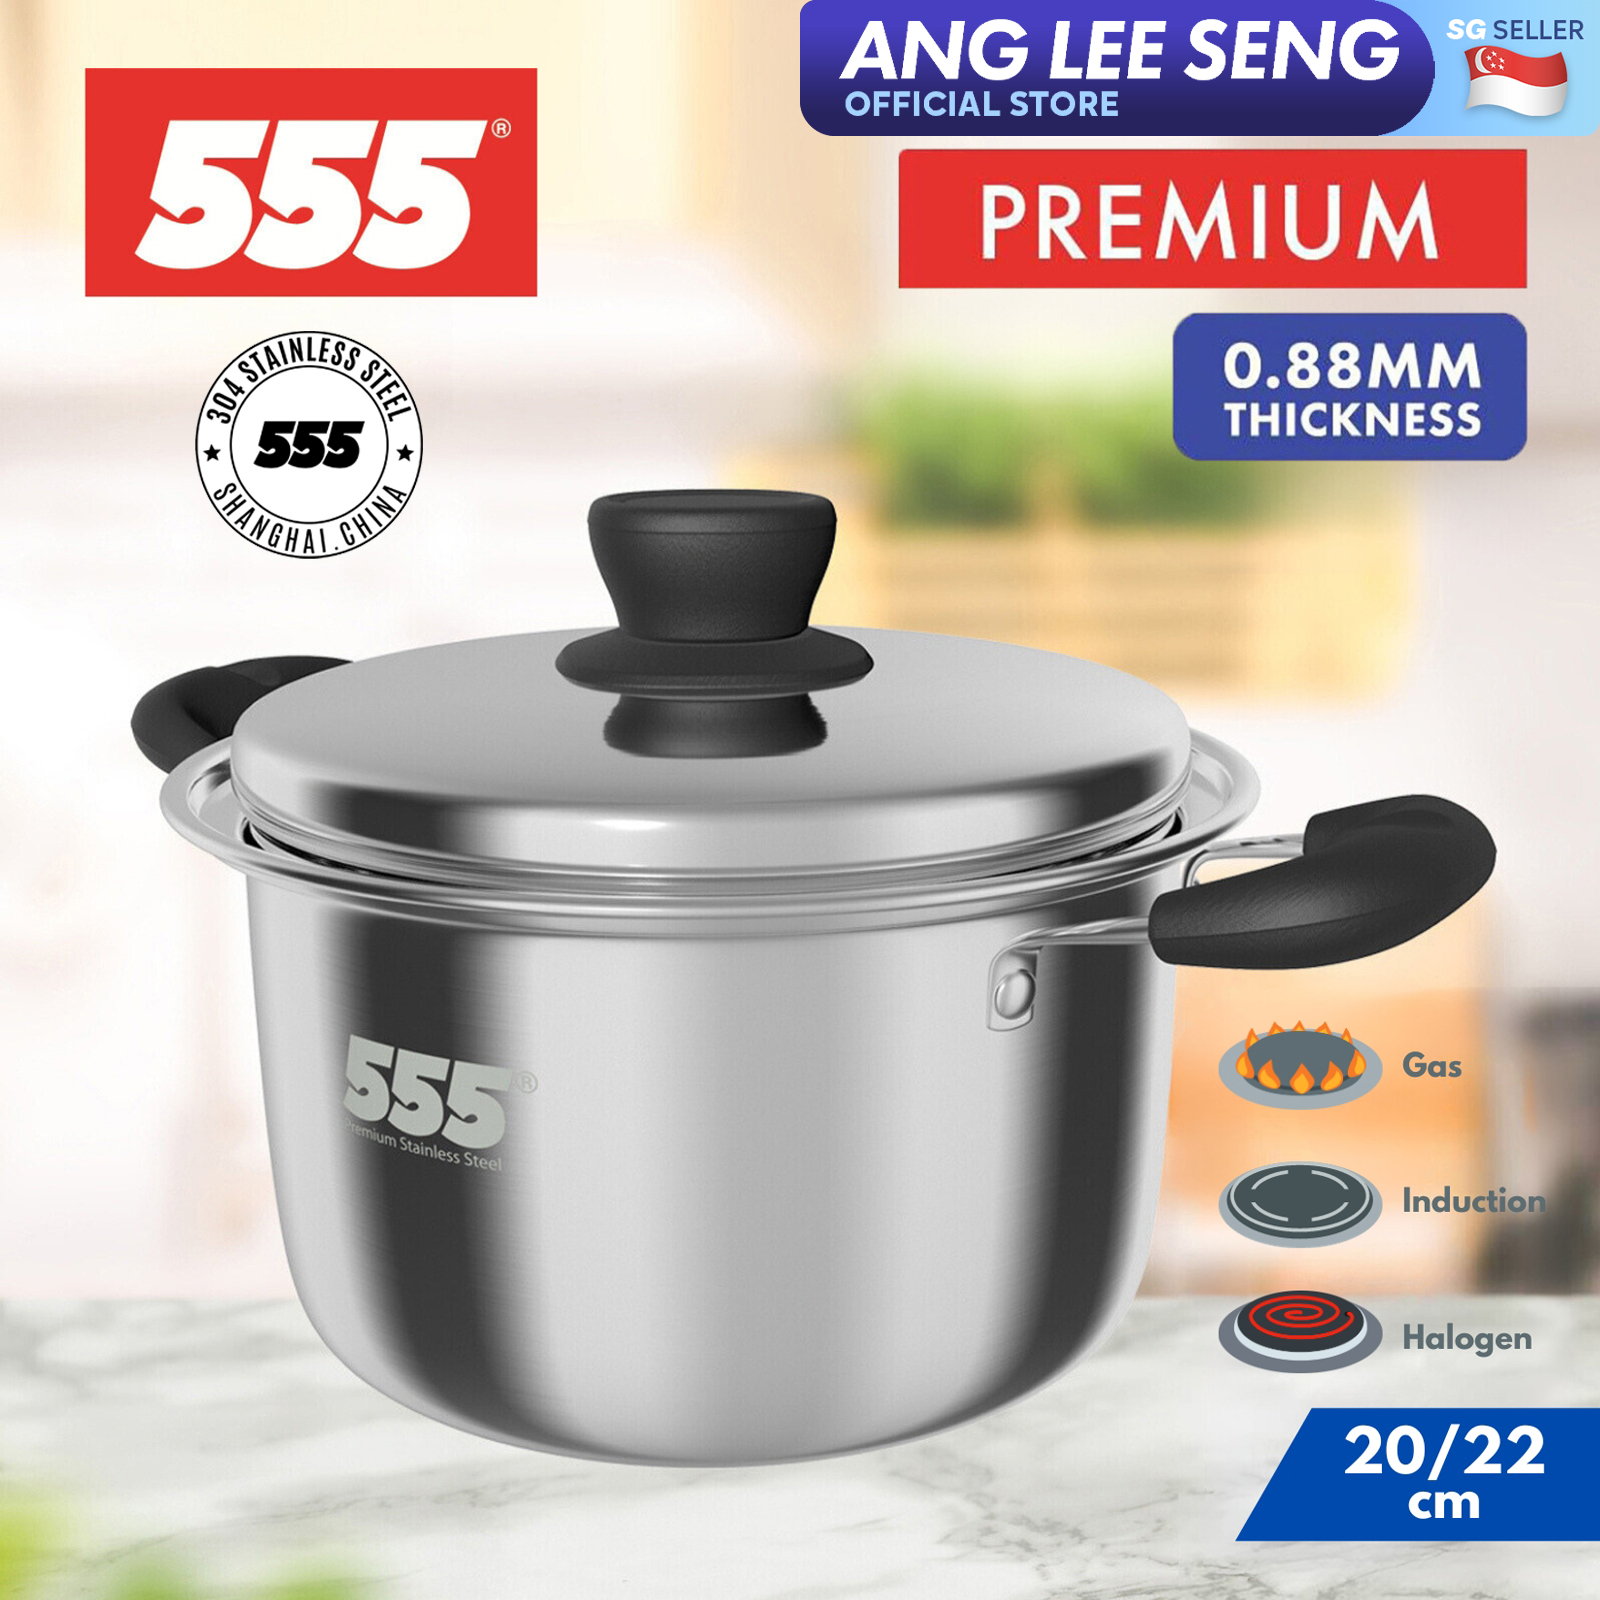 555 Premium Stainless Steel Sauce Pot - 304 Stainless Steel 0.88mm Thickness